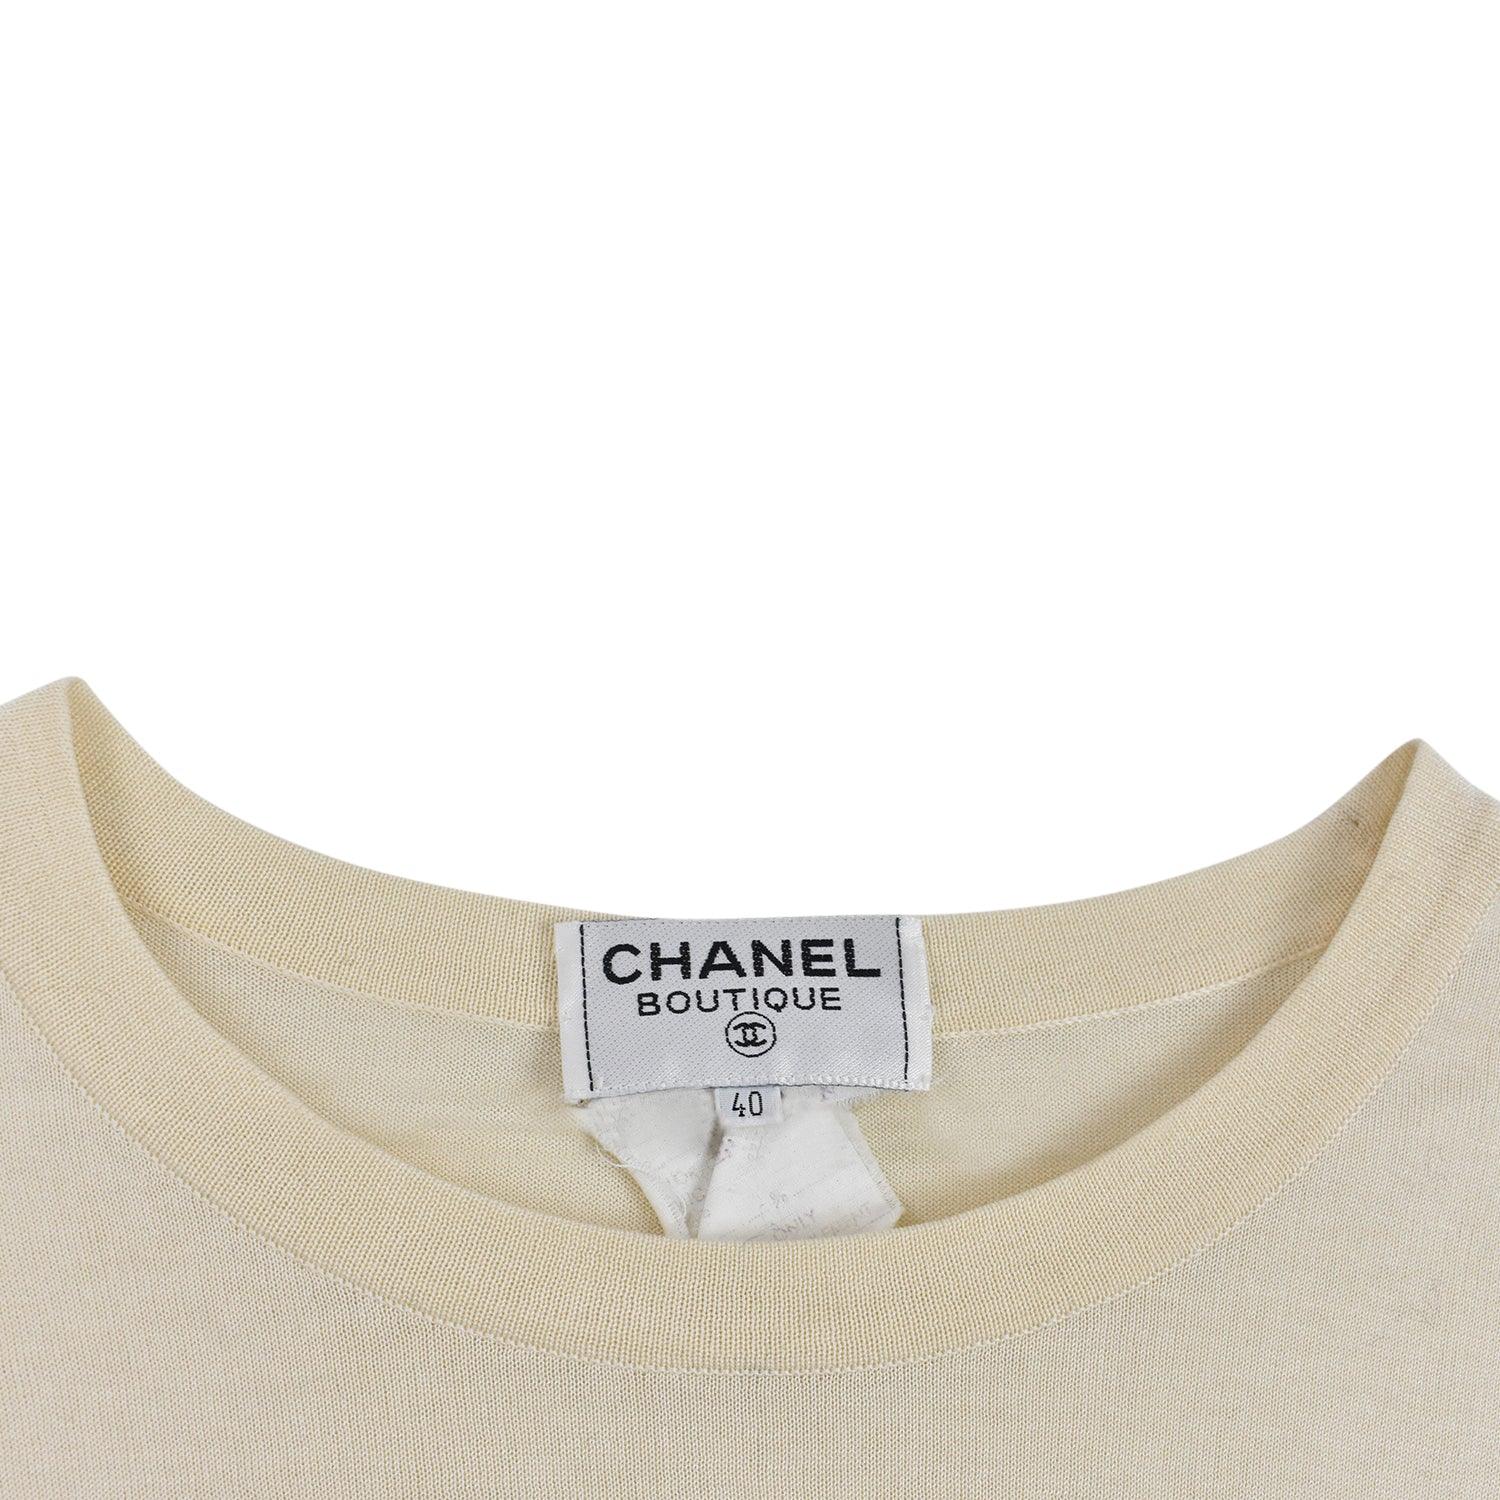 Chanel Top - Women's 40 - Fashionably Yours